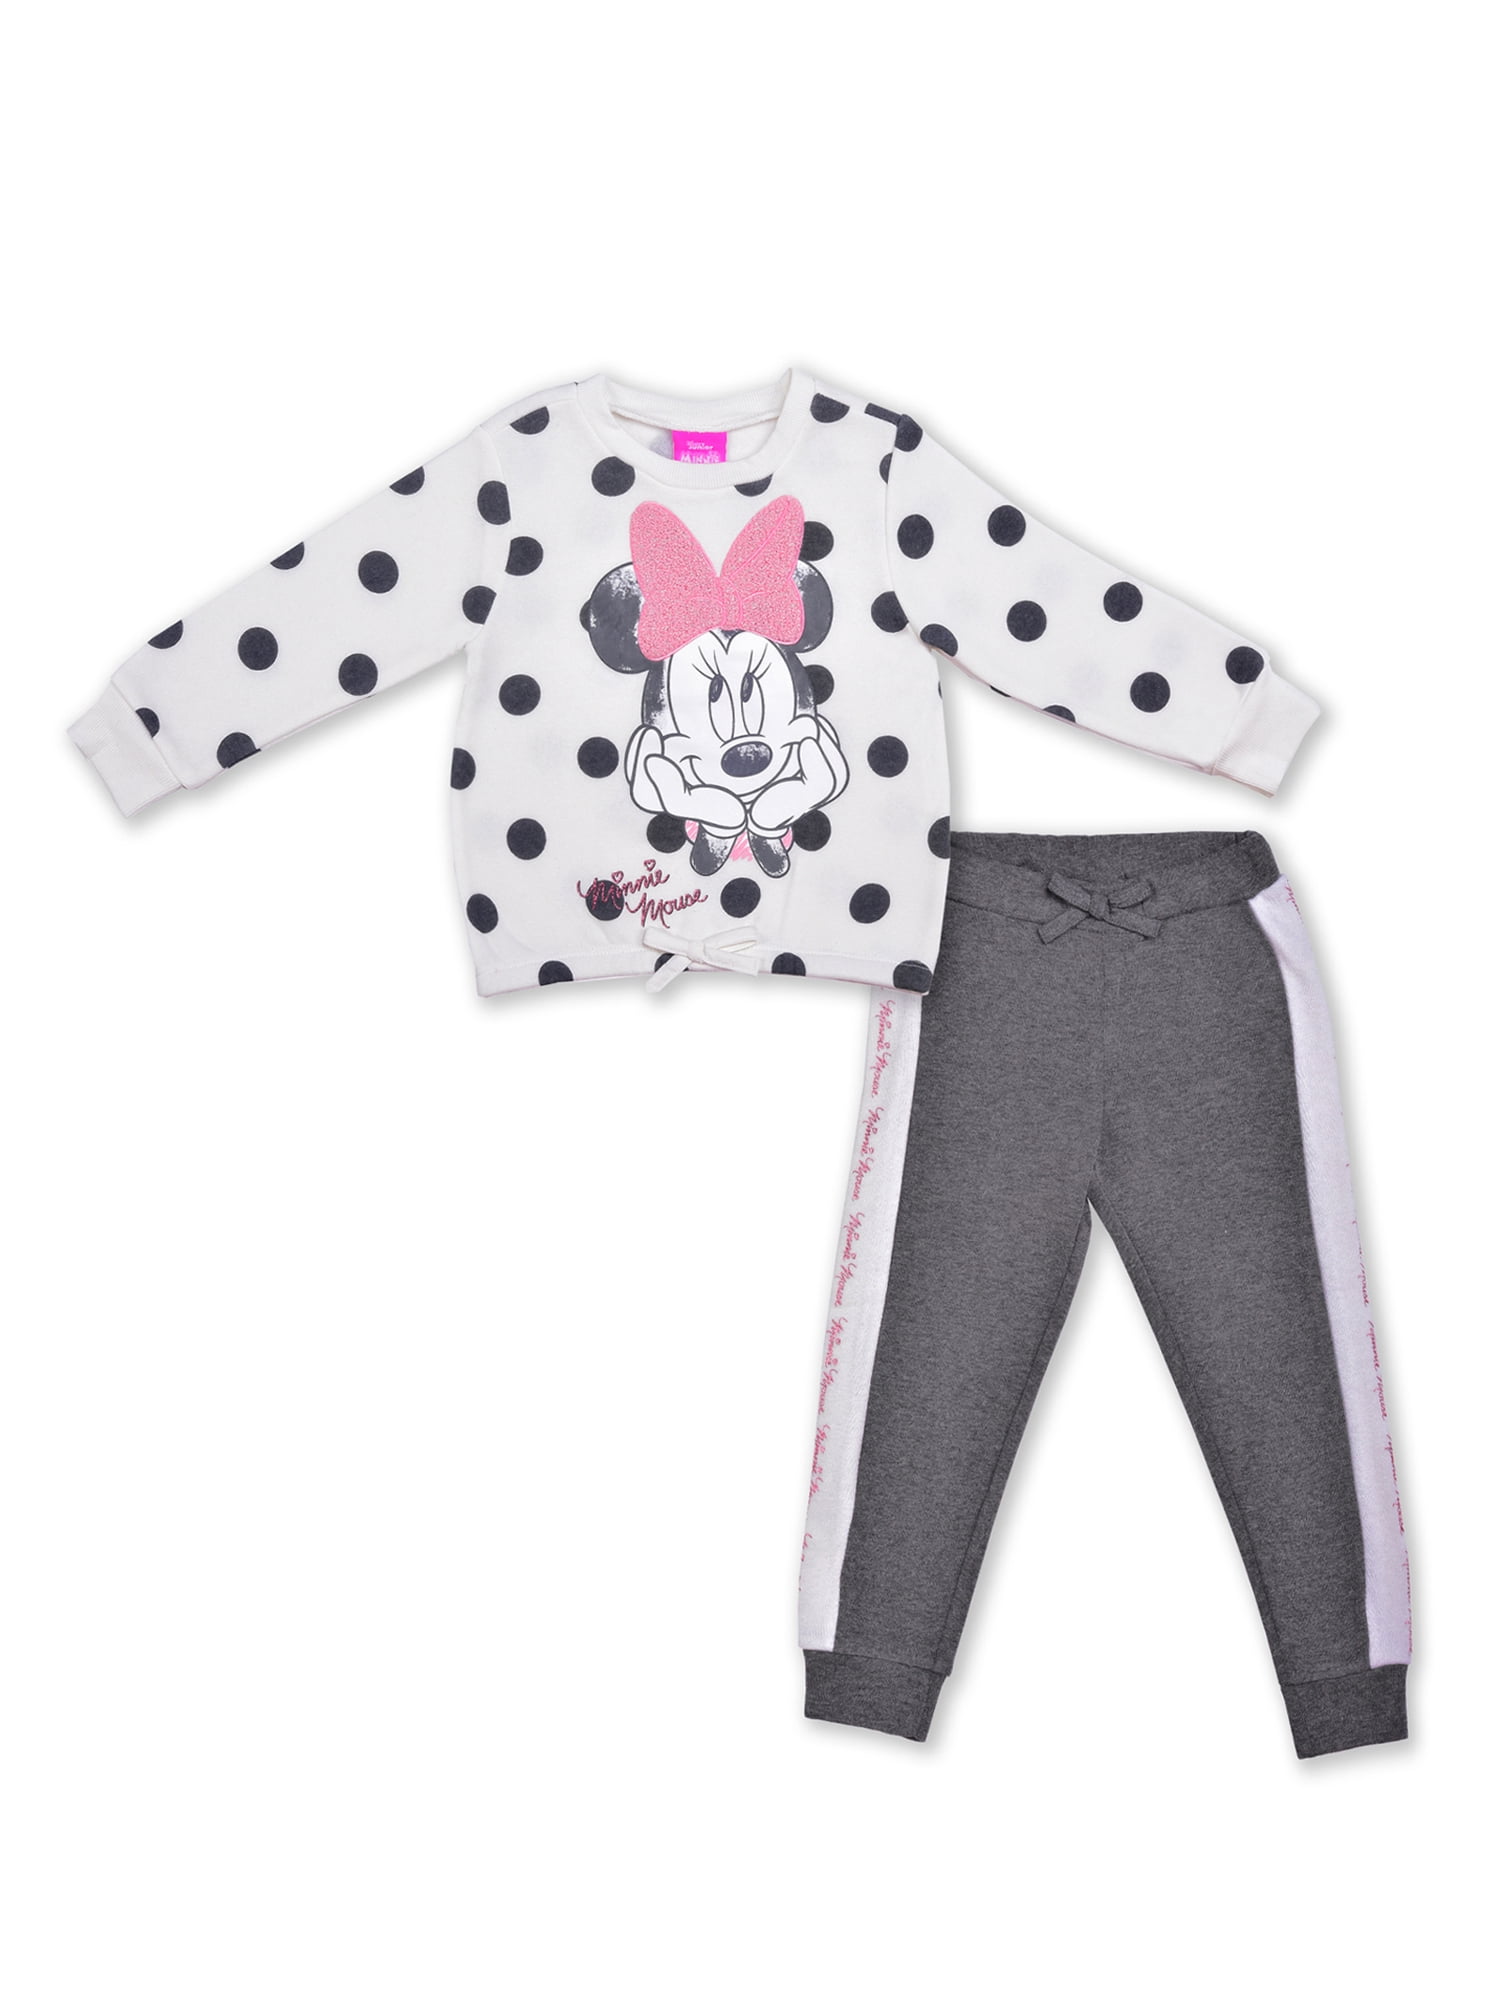 2PCS Girls Minnie Mouse Tracksuit Pullover Tops Pants Kids Toddler Outfits Suit 